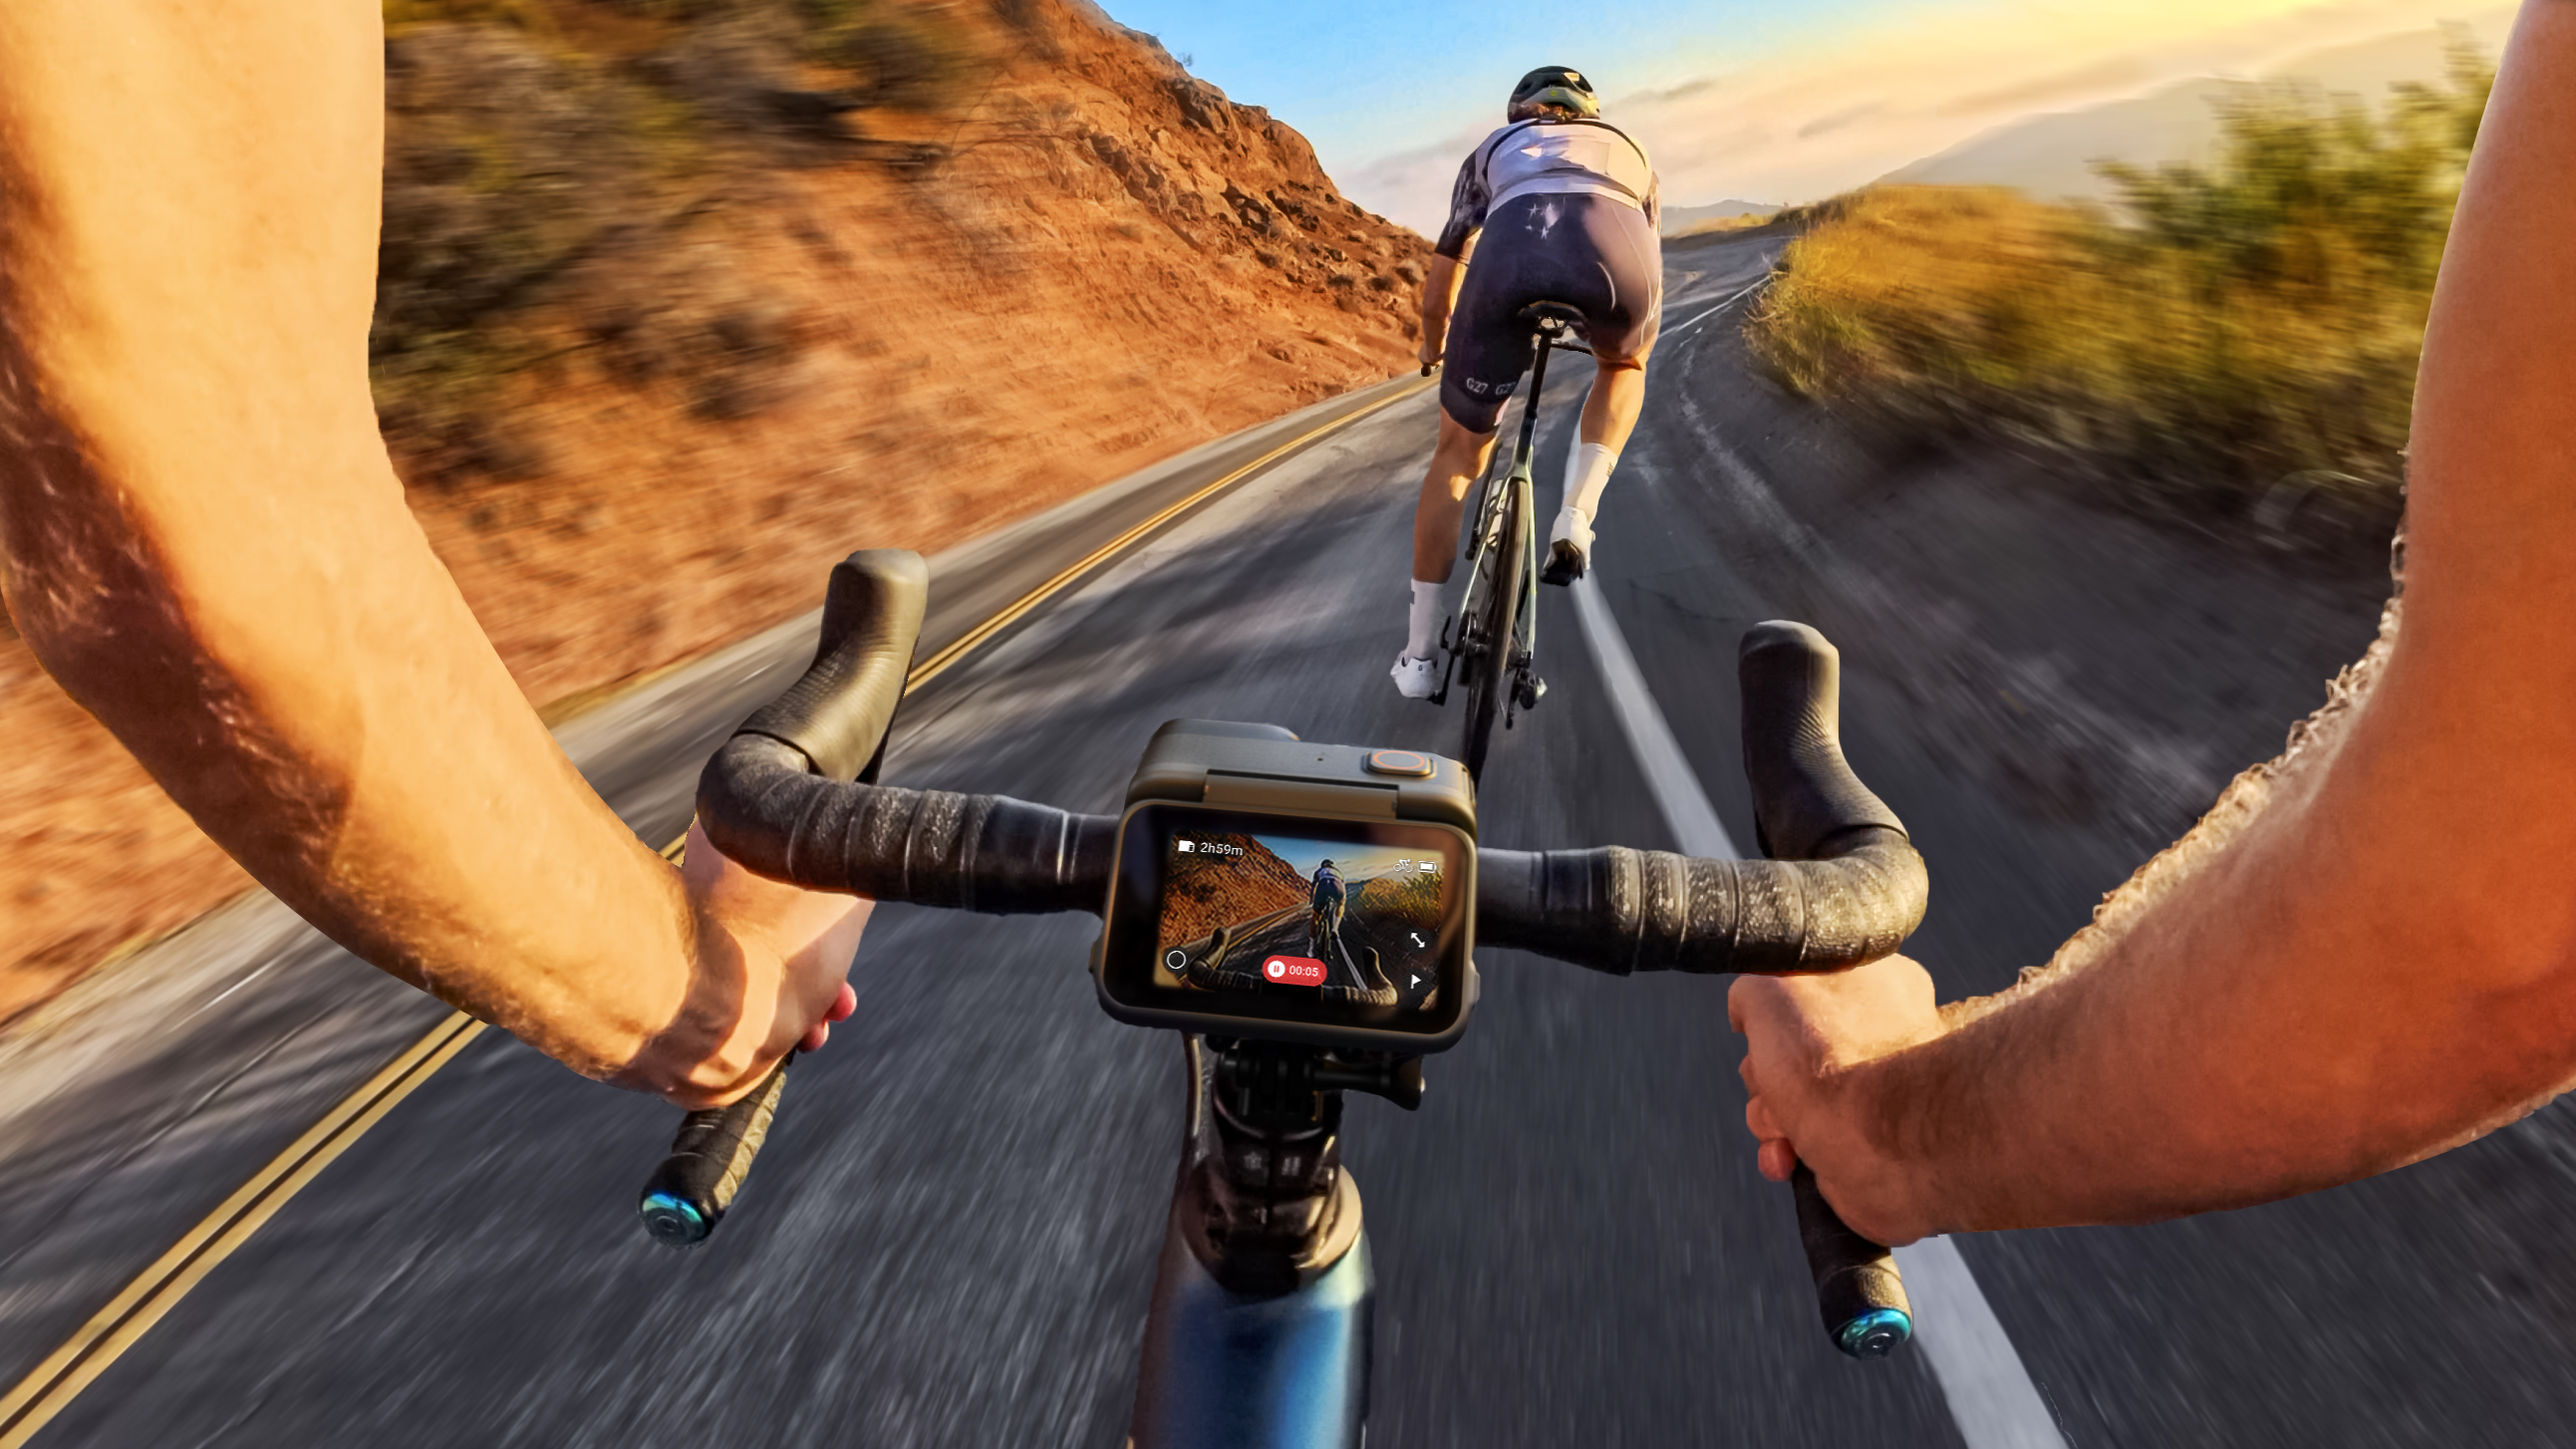 Insta360 Ace Pro mounted to handlebars of a roadbike going at speed on a desert road